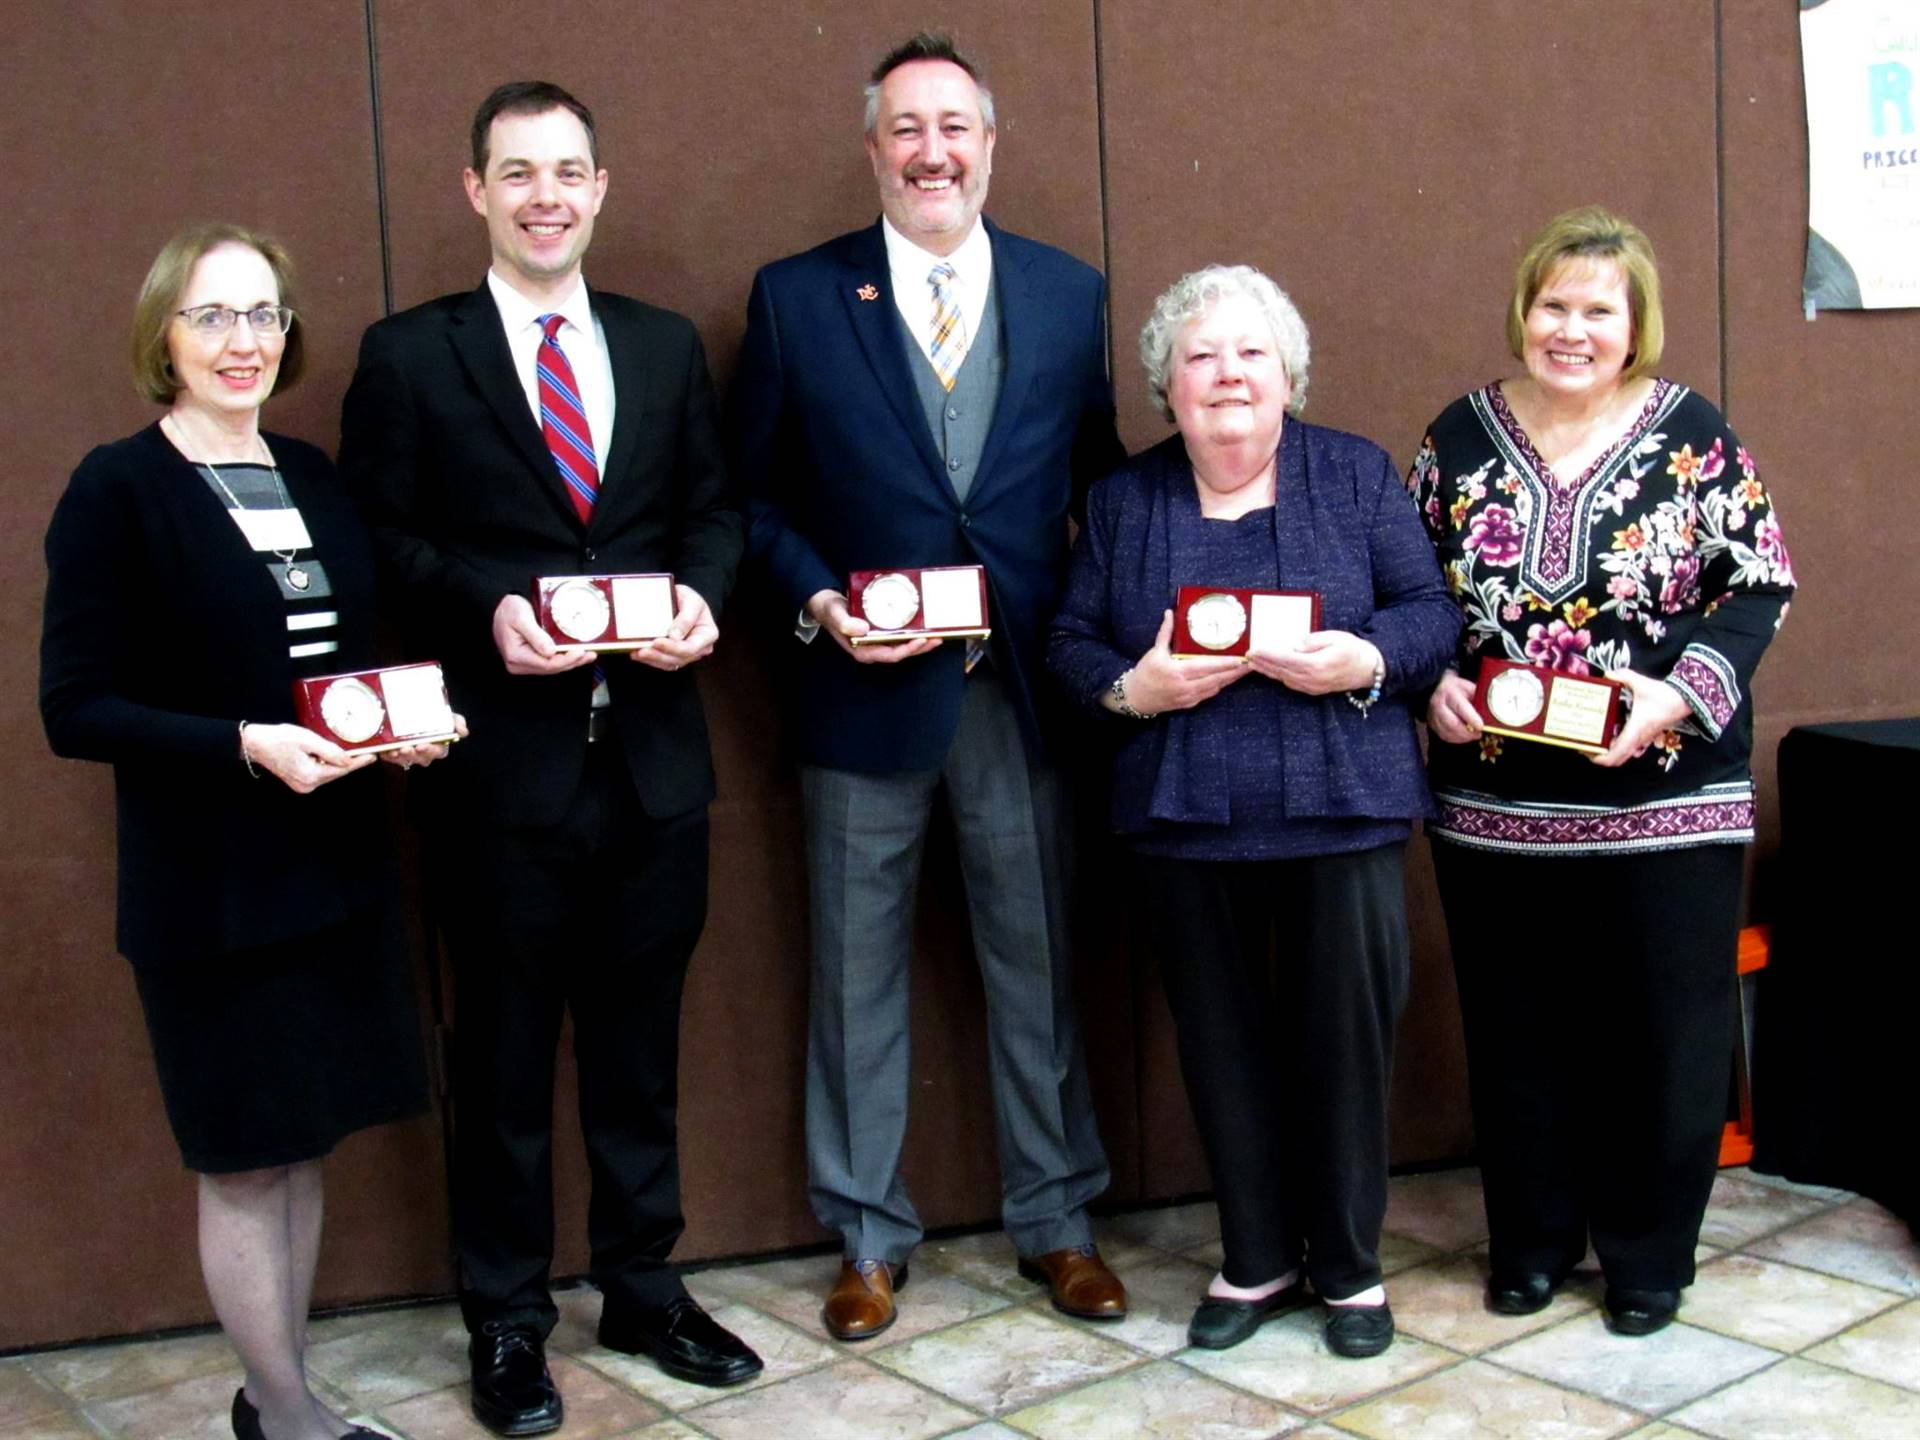 Three women and two men who received the Endowment Awards